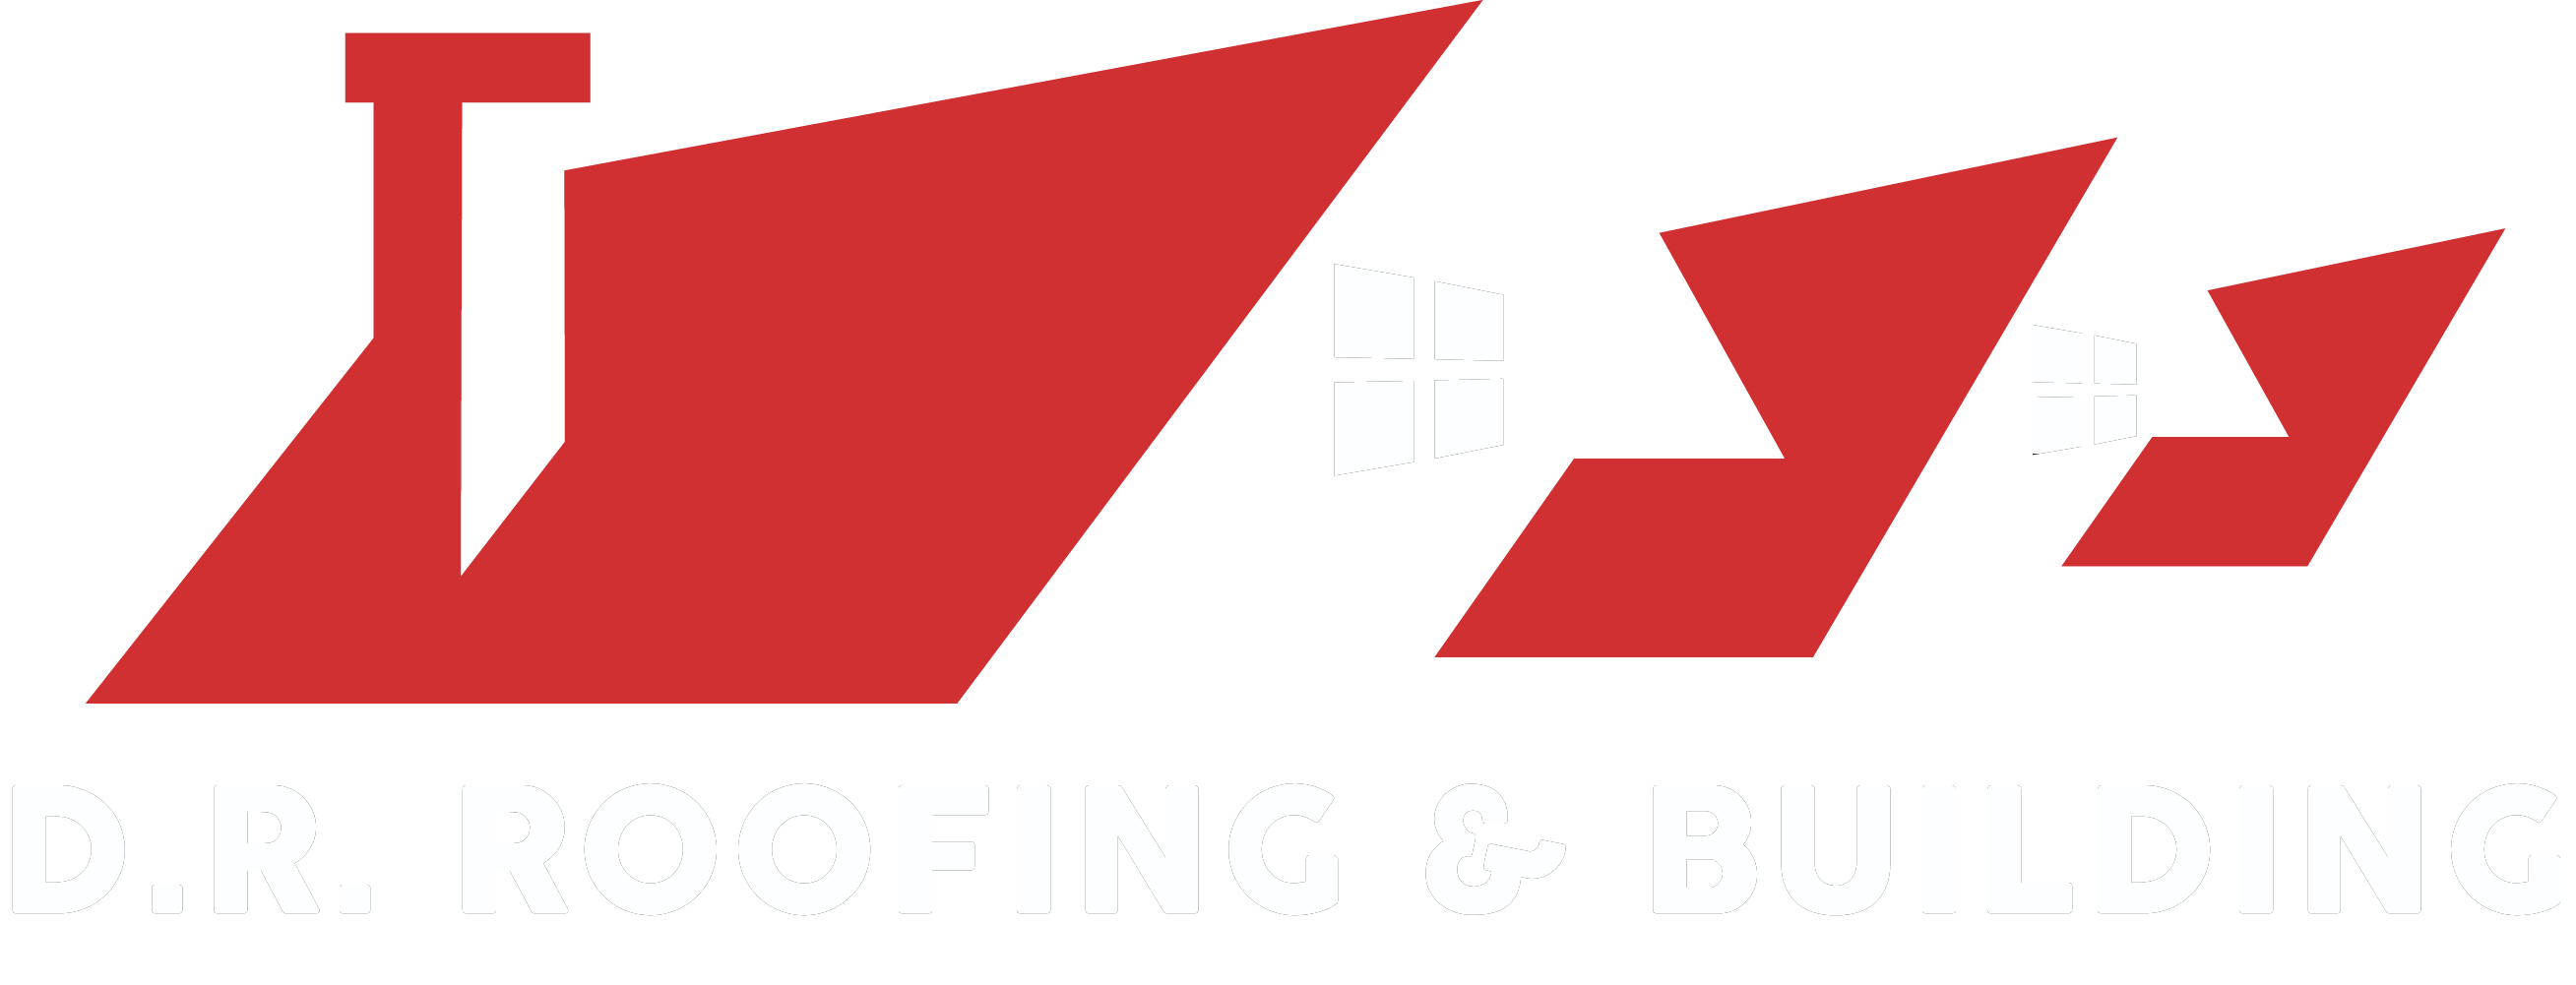 D. R. Roofing & Building